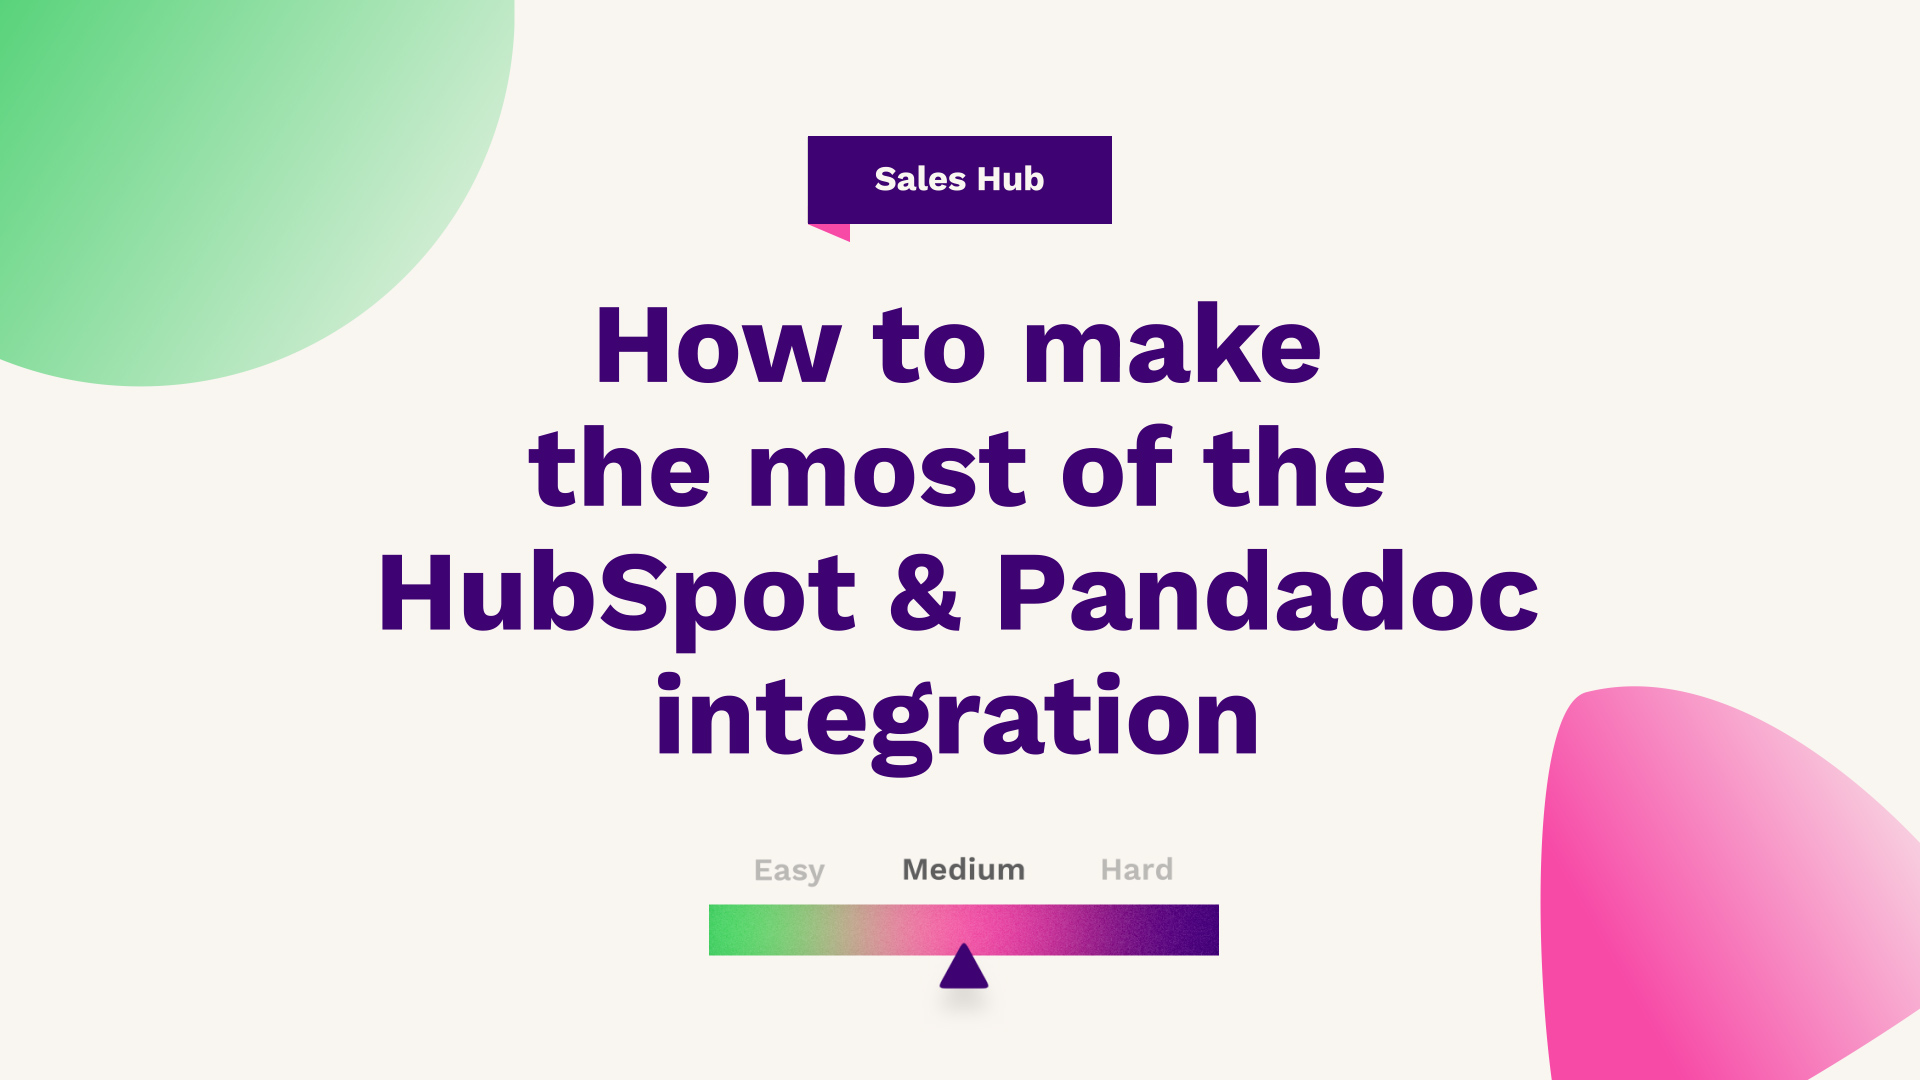 How to make the most of the HubSpot & Pandadoc integration